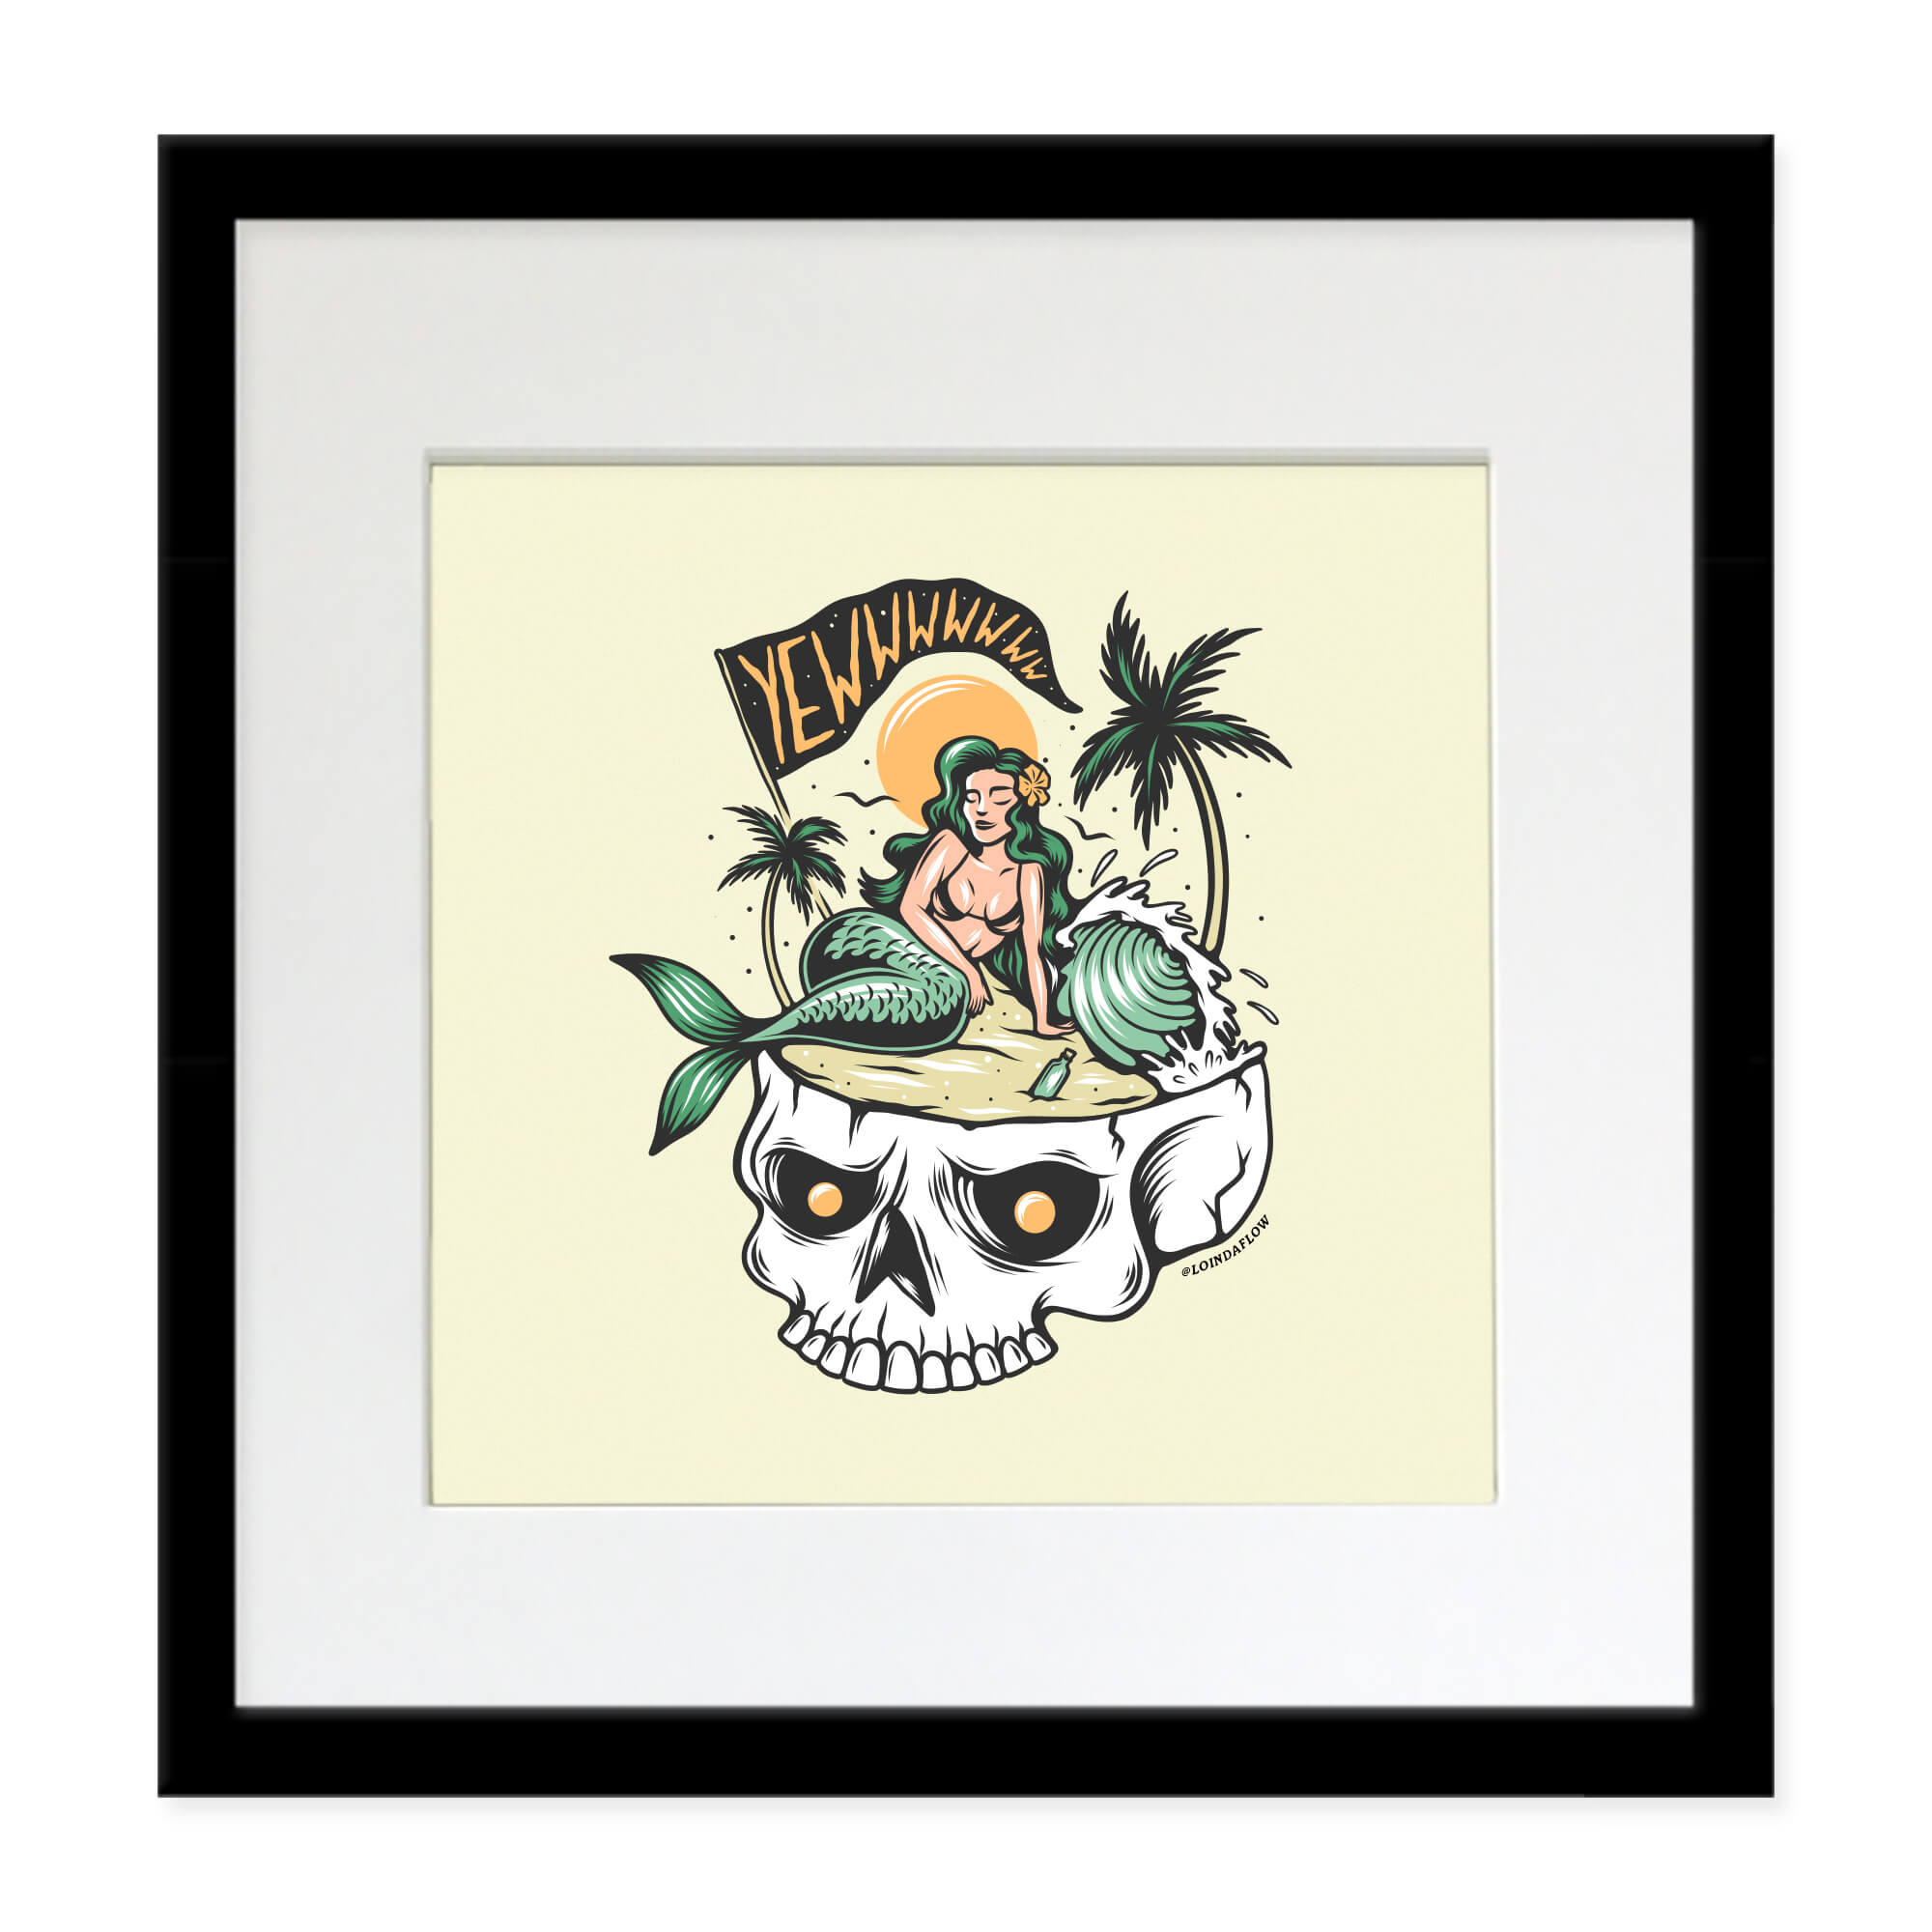 A matted art print with black frame  featuring a mermaid illustration with a green tail by by Hawaii artist Laihha Organna